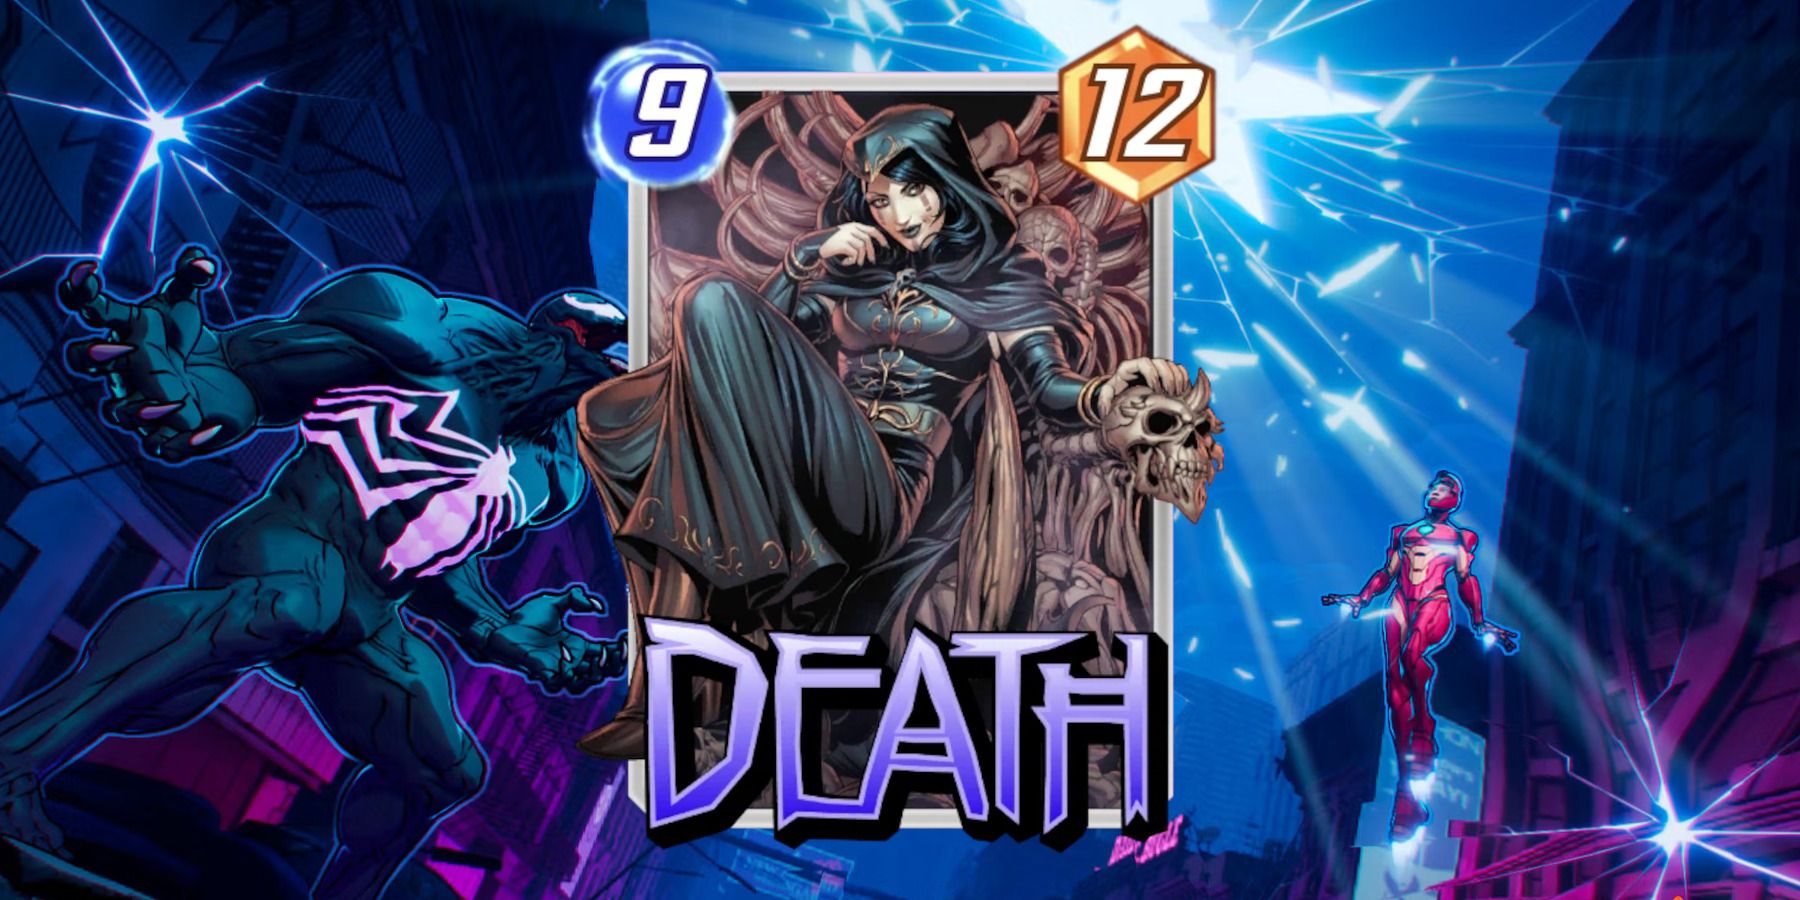 The Death card in Marvel Snap on top of promotional art for the game.